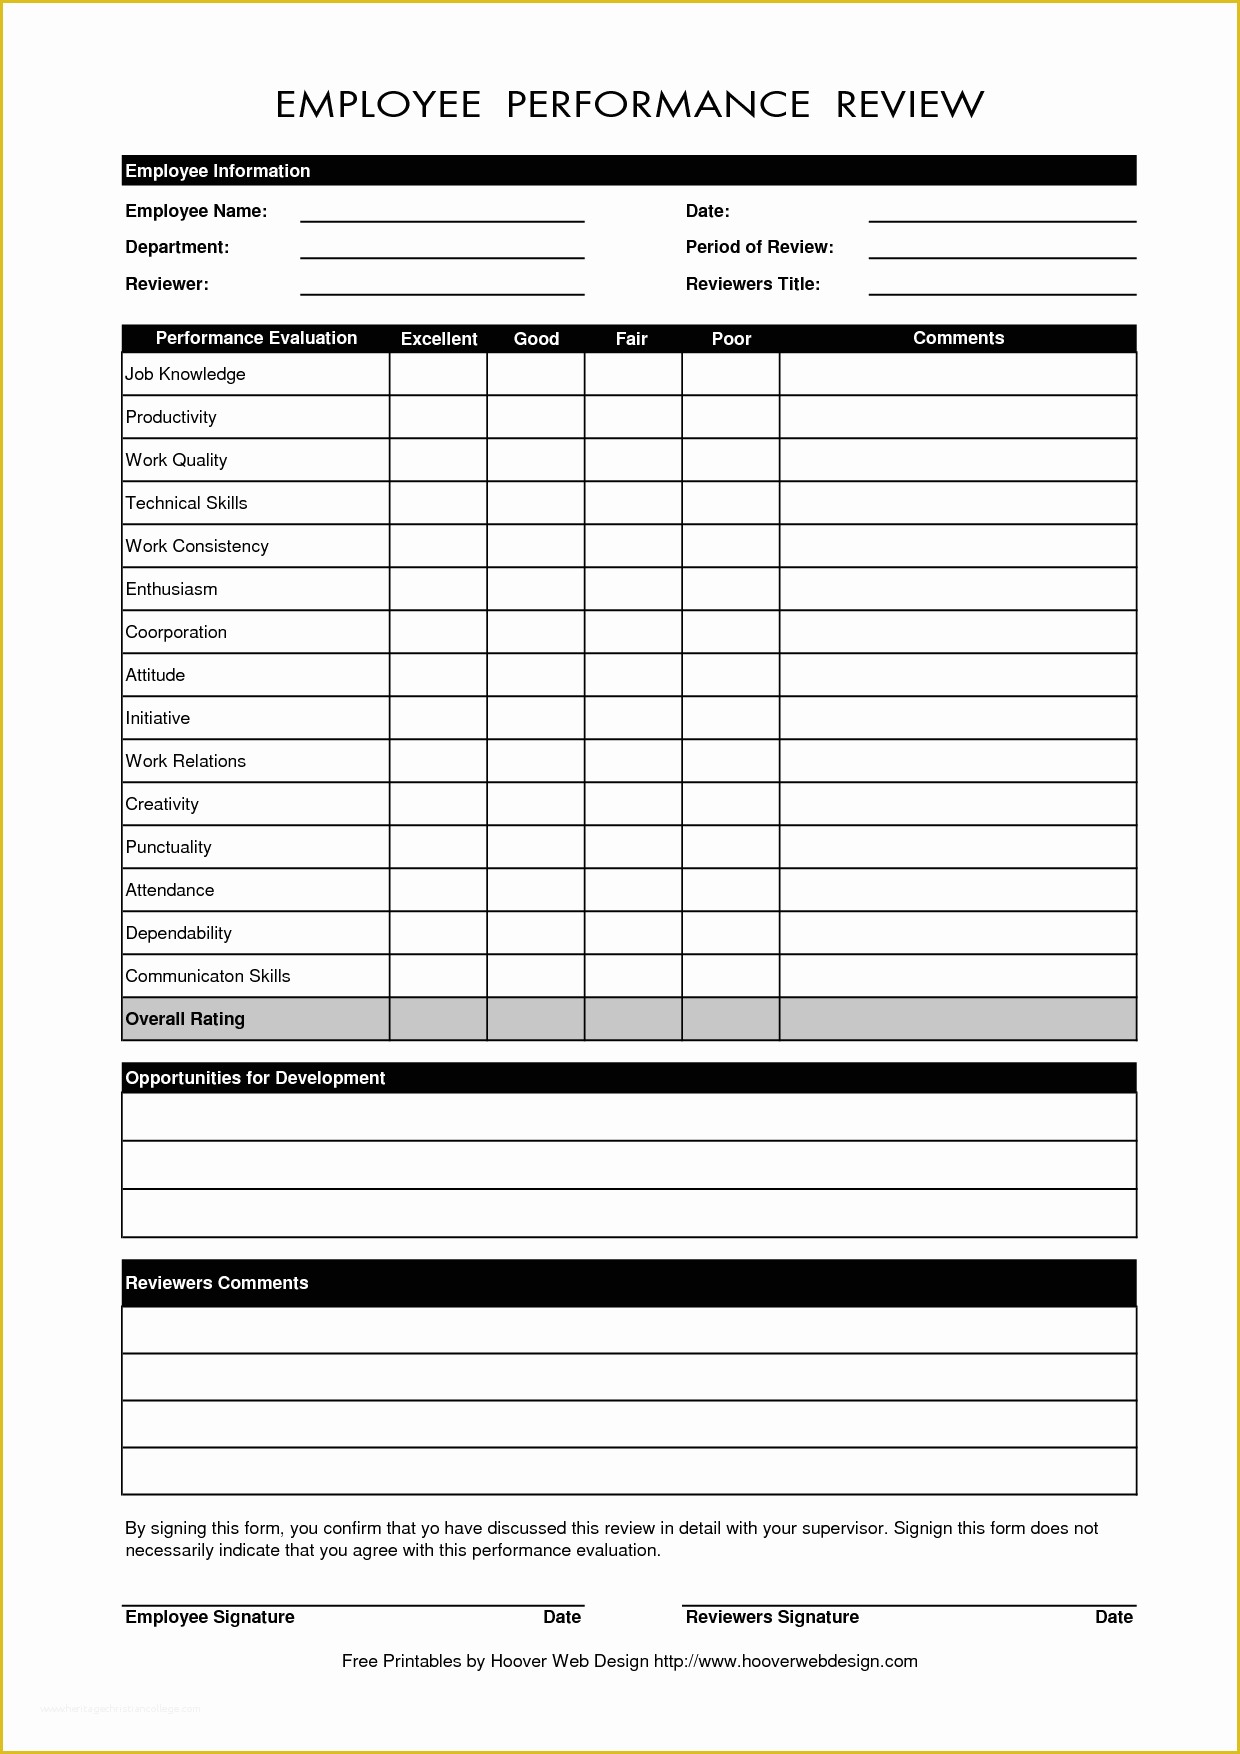 Hr Documents Templates Free Of Free Employee Performance Evaluation form Template